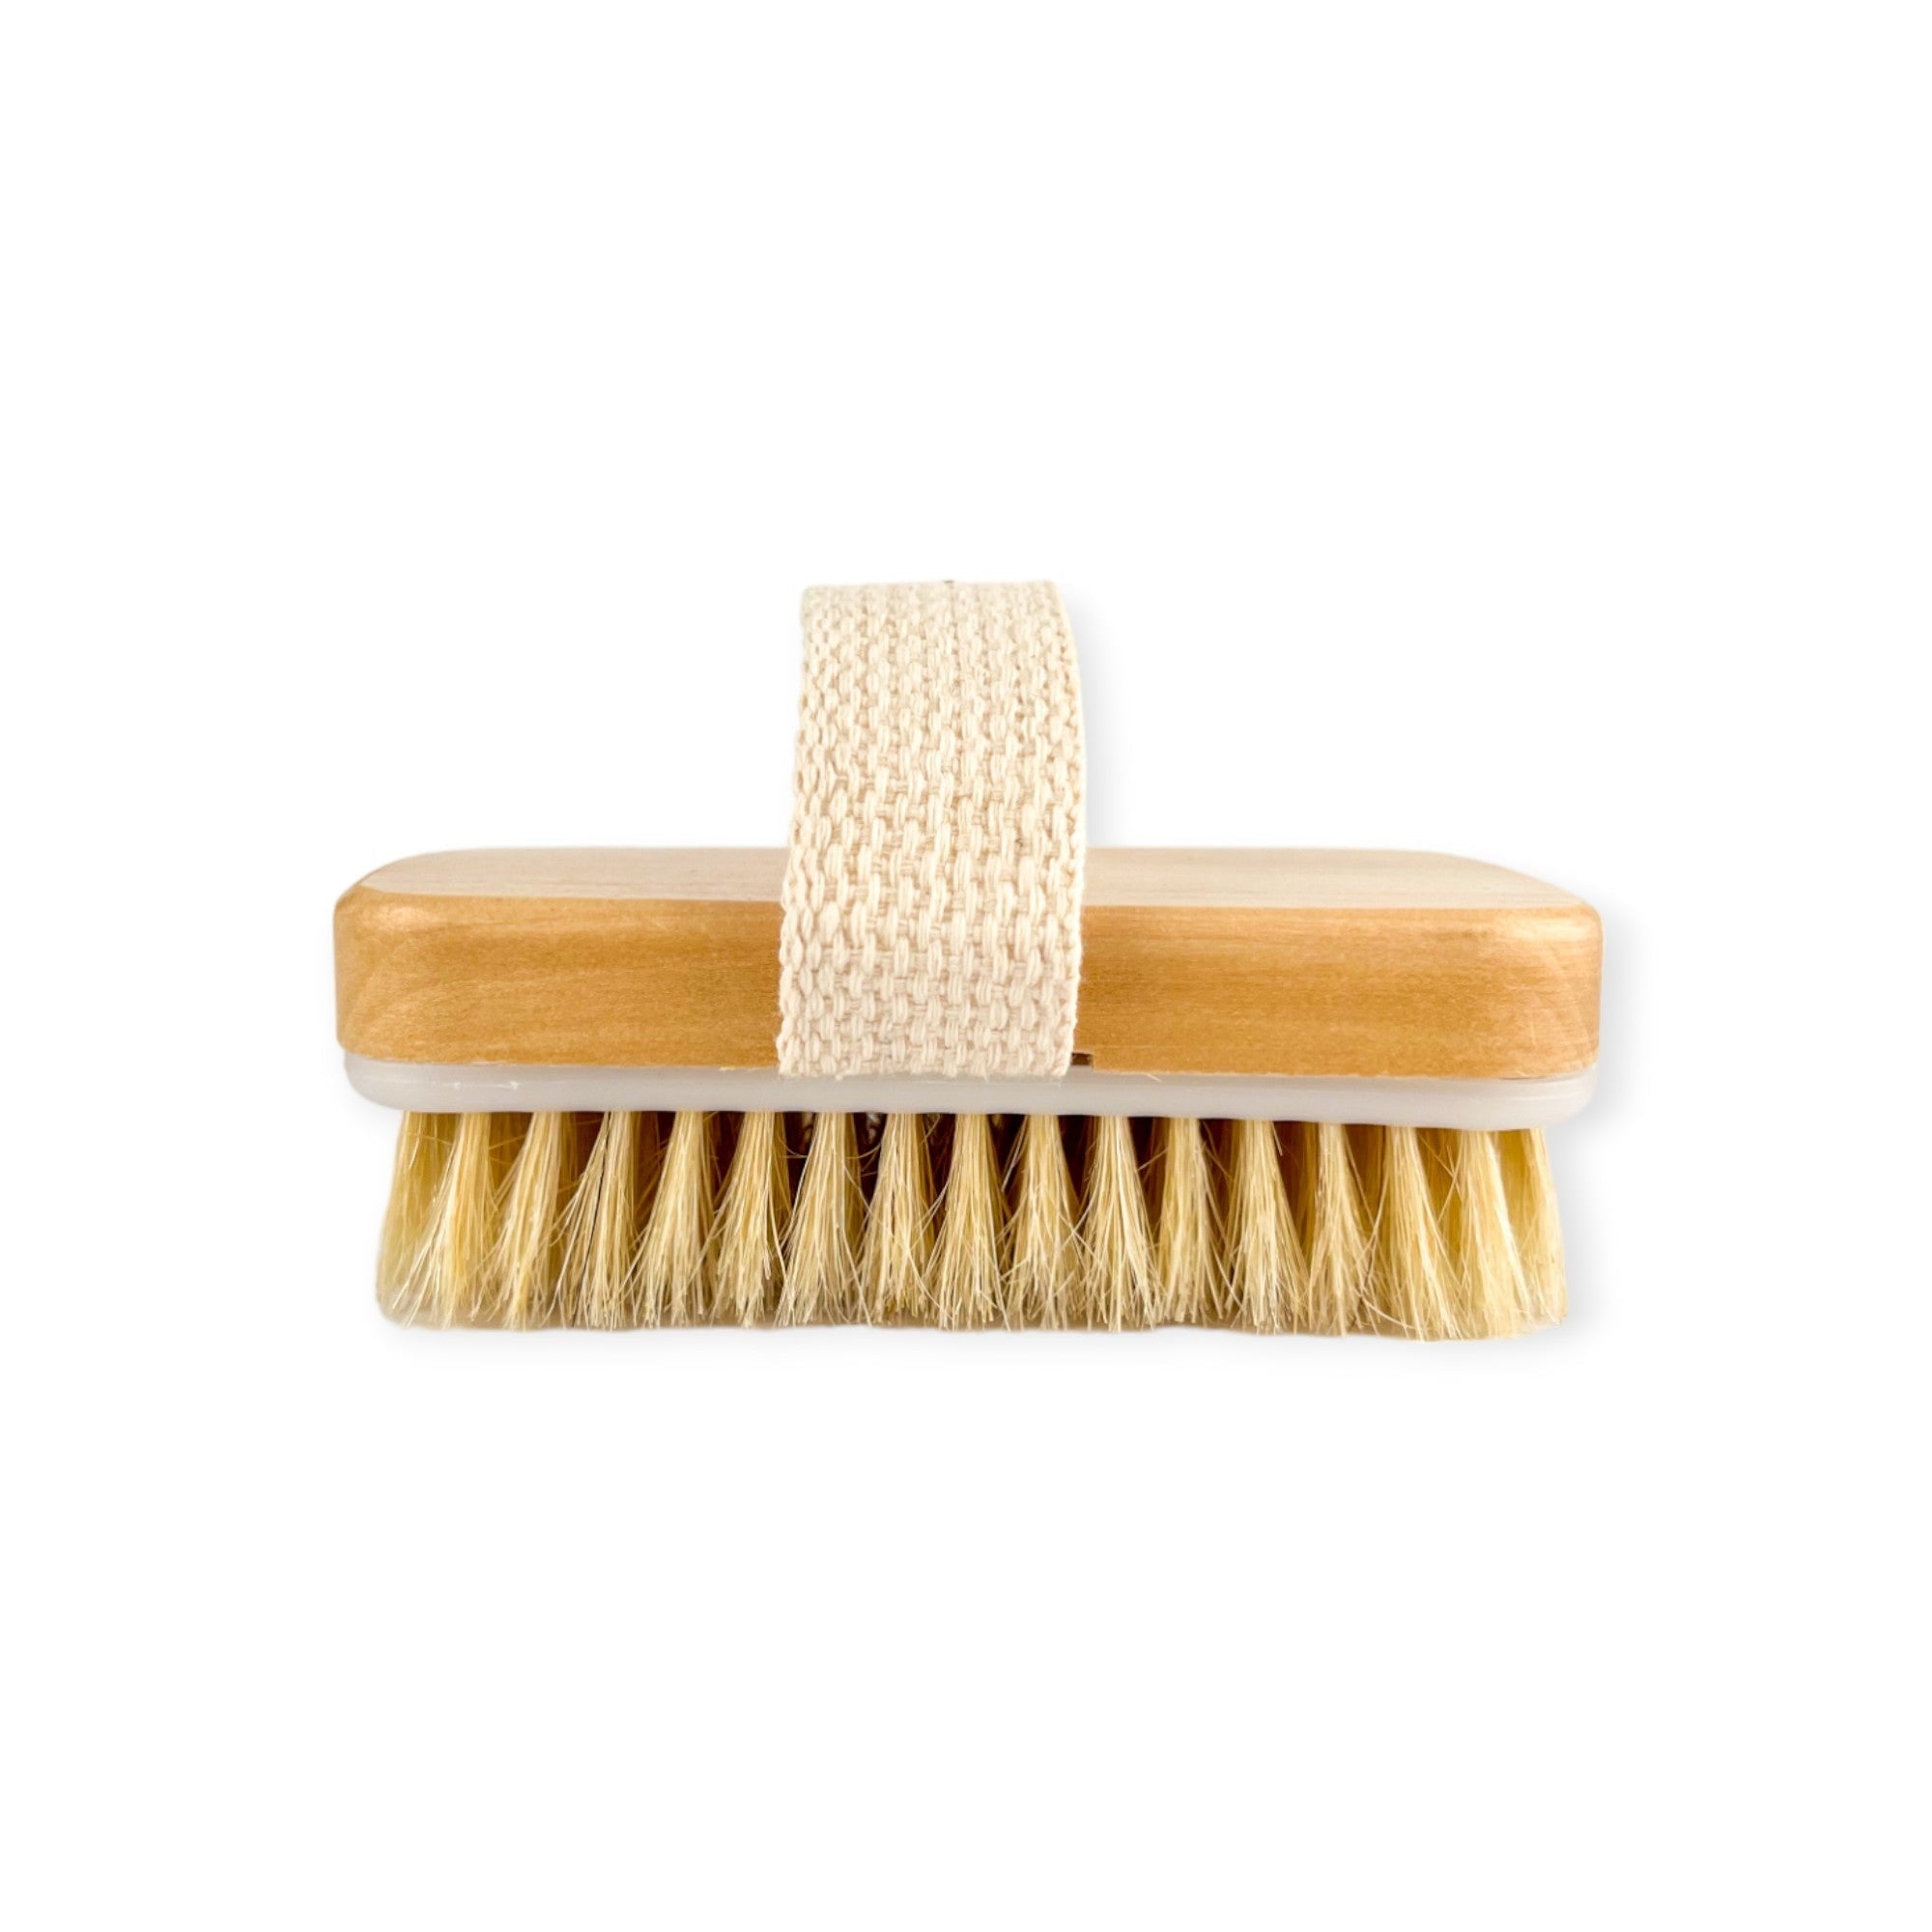 Natural Body Brush - Old Town Soap Co.